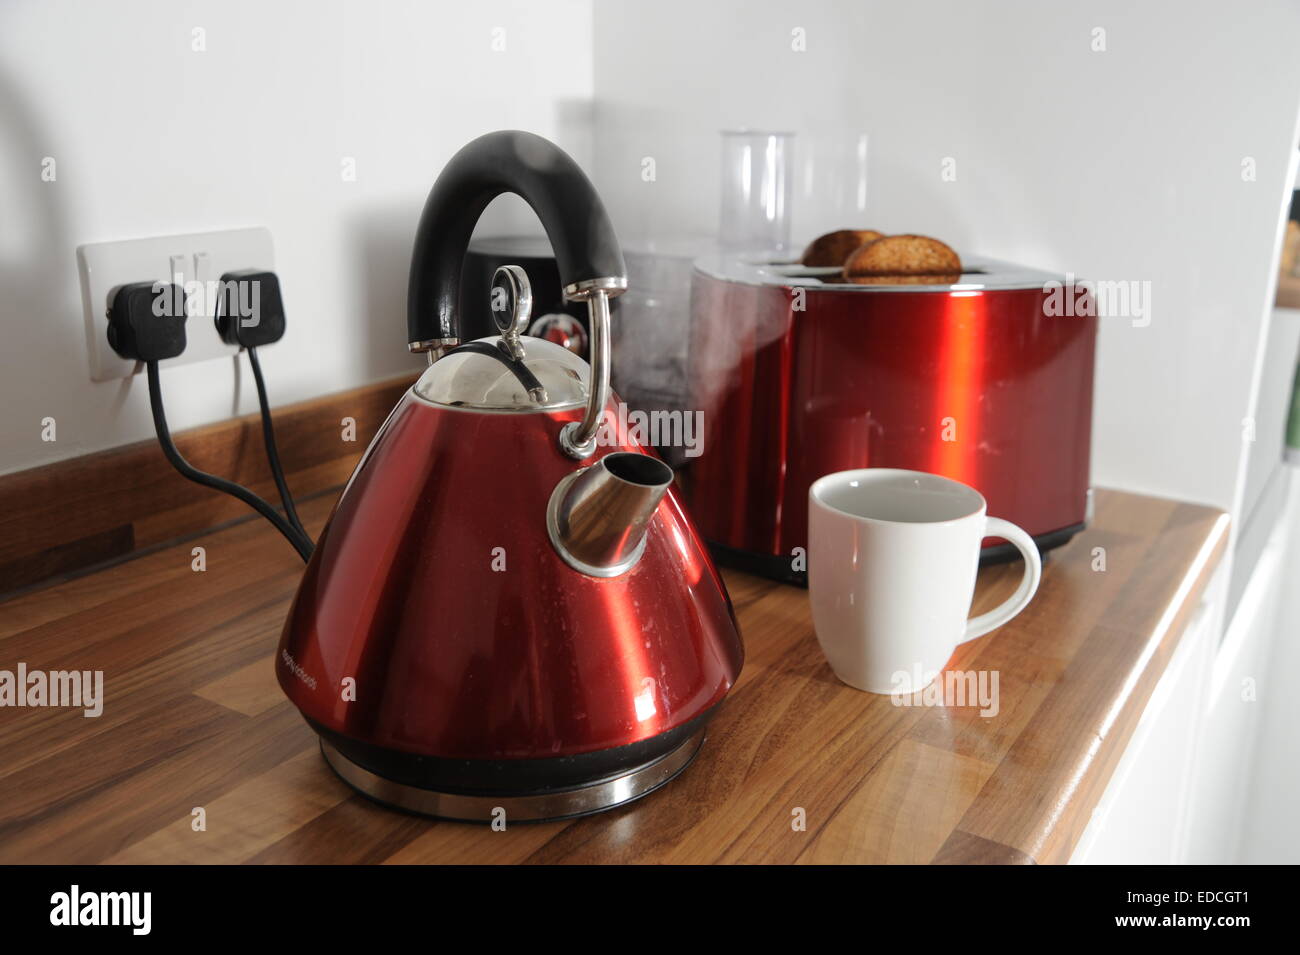 https://c8.alamy.com/comp/EDCGT1/kettle-boiling-with-steam-and-toaster-cooking-toast-behind-in-kitchen-EDCGT1.jpg